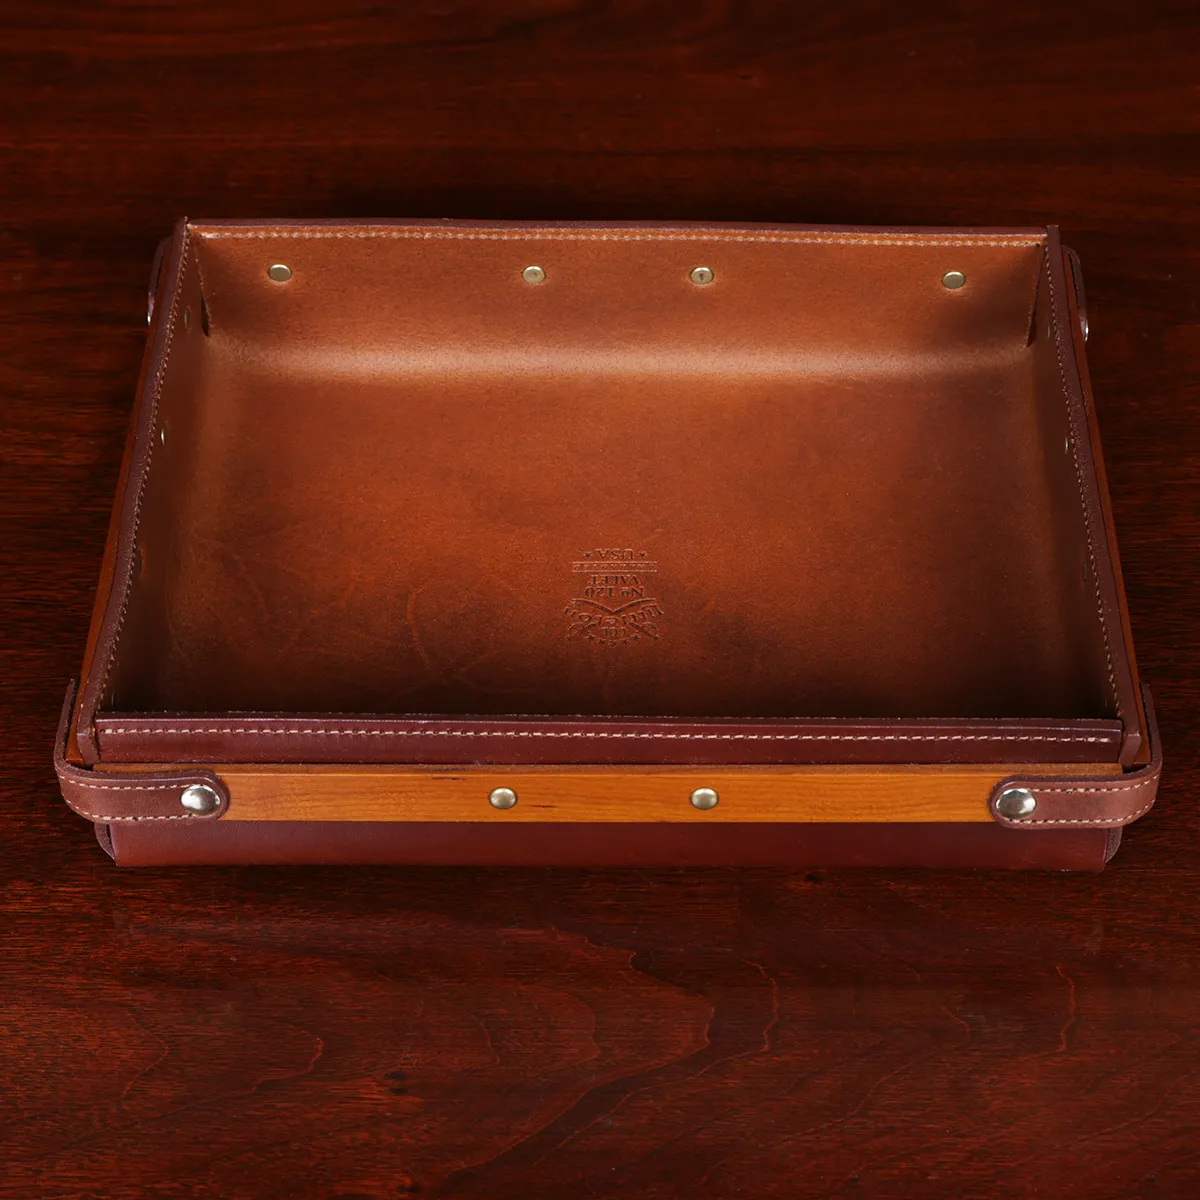 Leather Valet Tray Organizer - No. 120 - Full-Grain Brown Leather - American Cherry Wood Trim - USA Made by Col. Littleton - 10 3/4′′ x 8 1/2” x 2 1/2